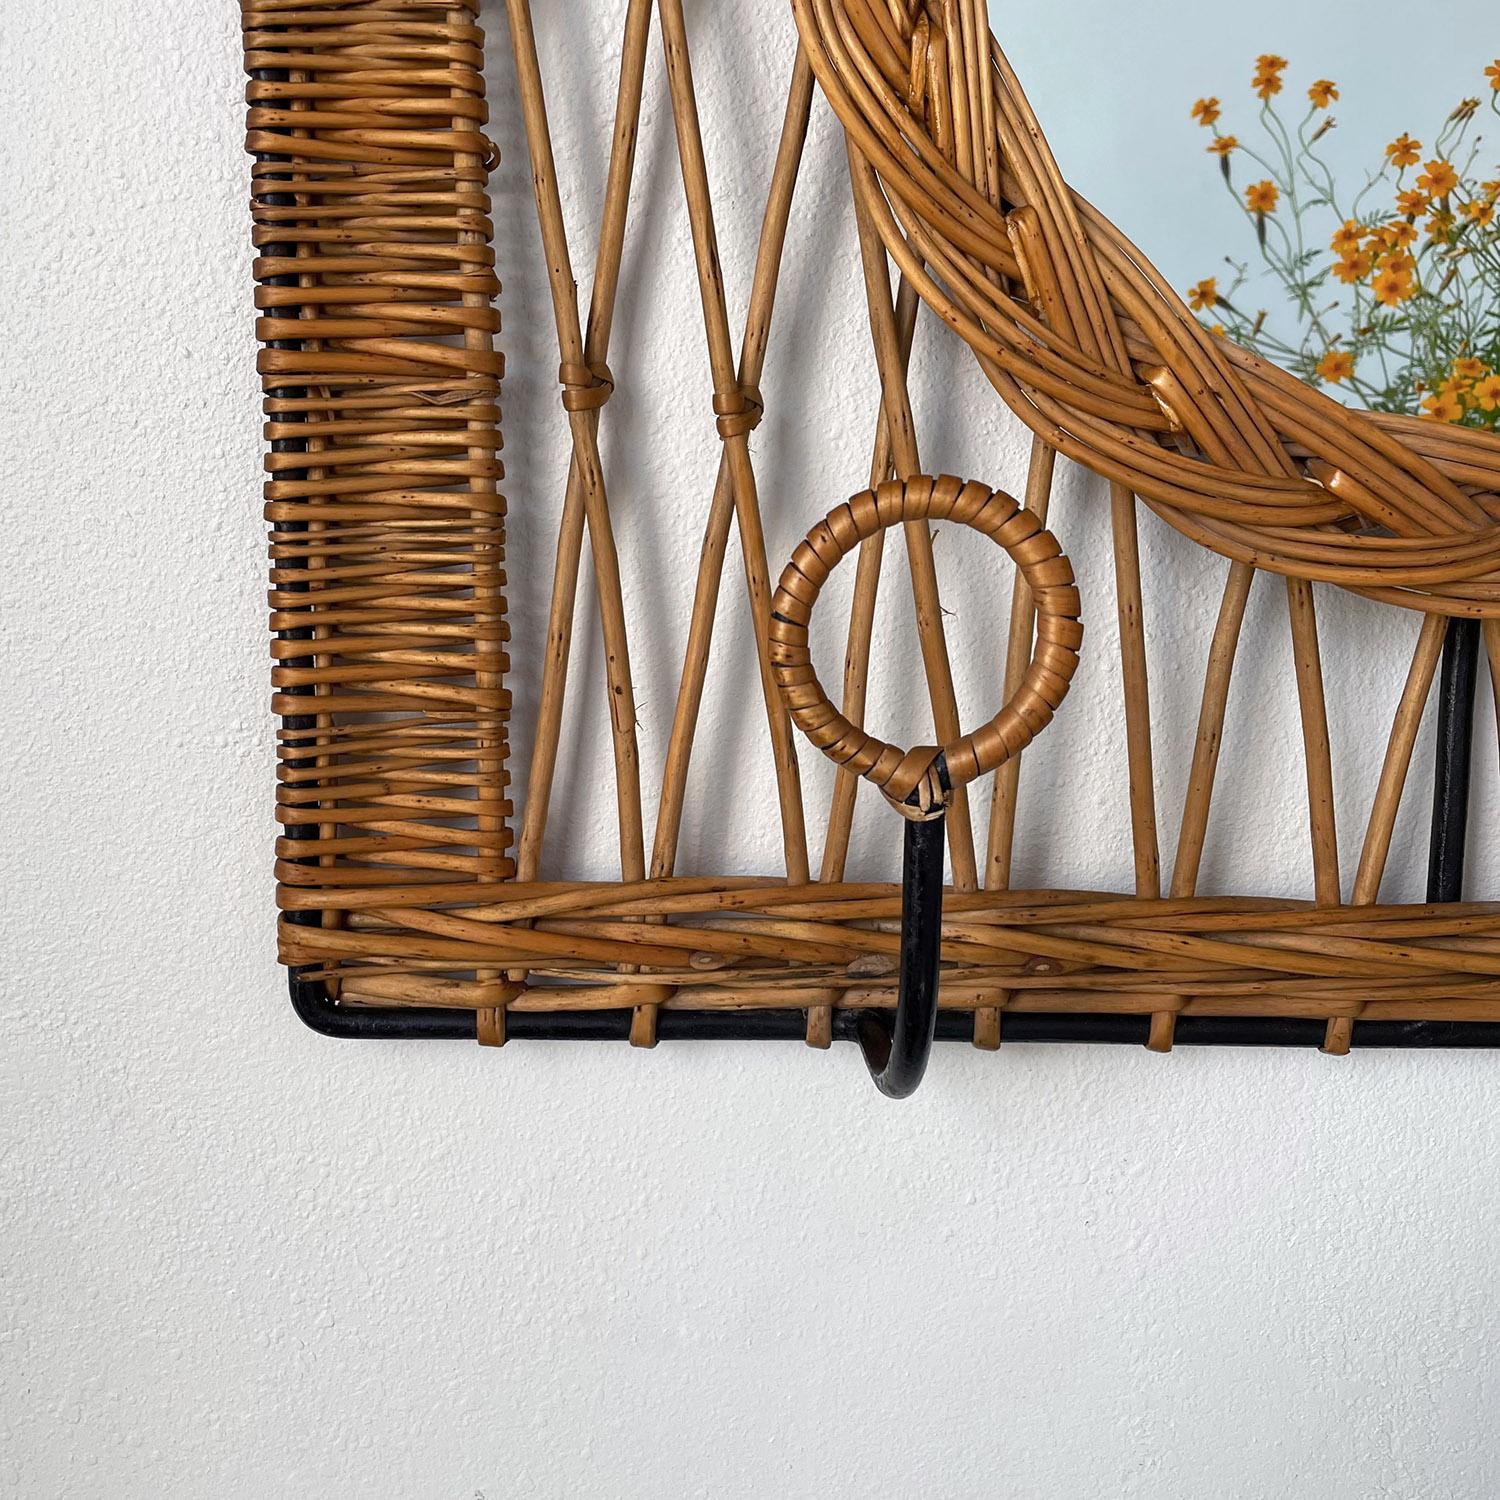 Mid-20th Century Jacques Adnet Style Wicker and Iron Mirrored Coat Rack For Sale